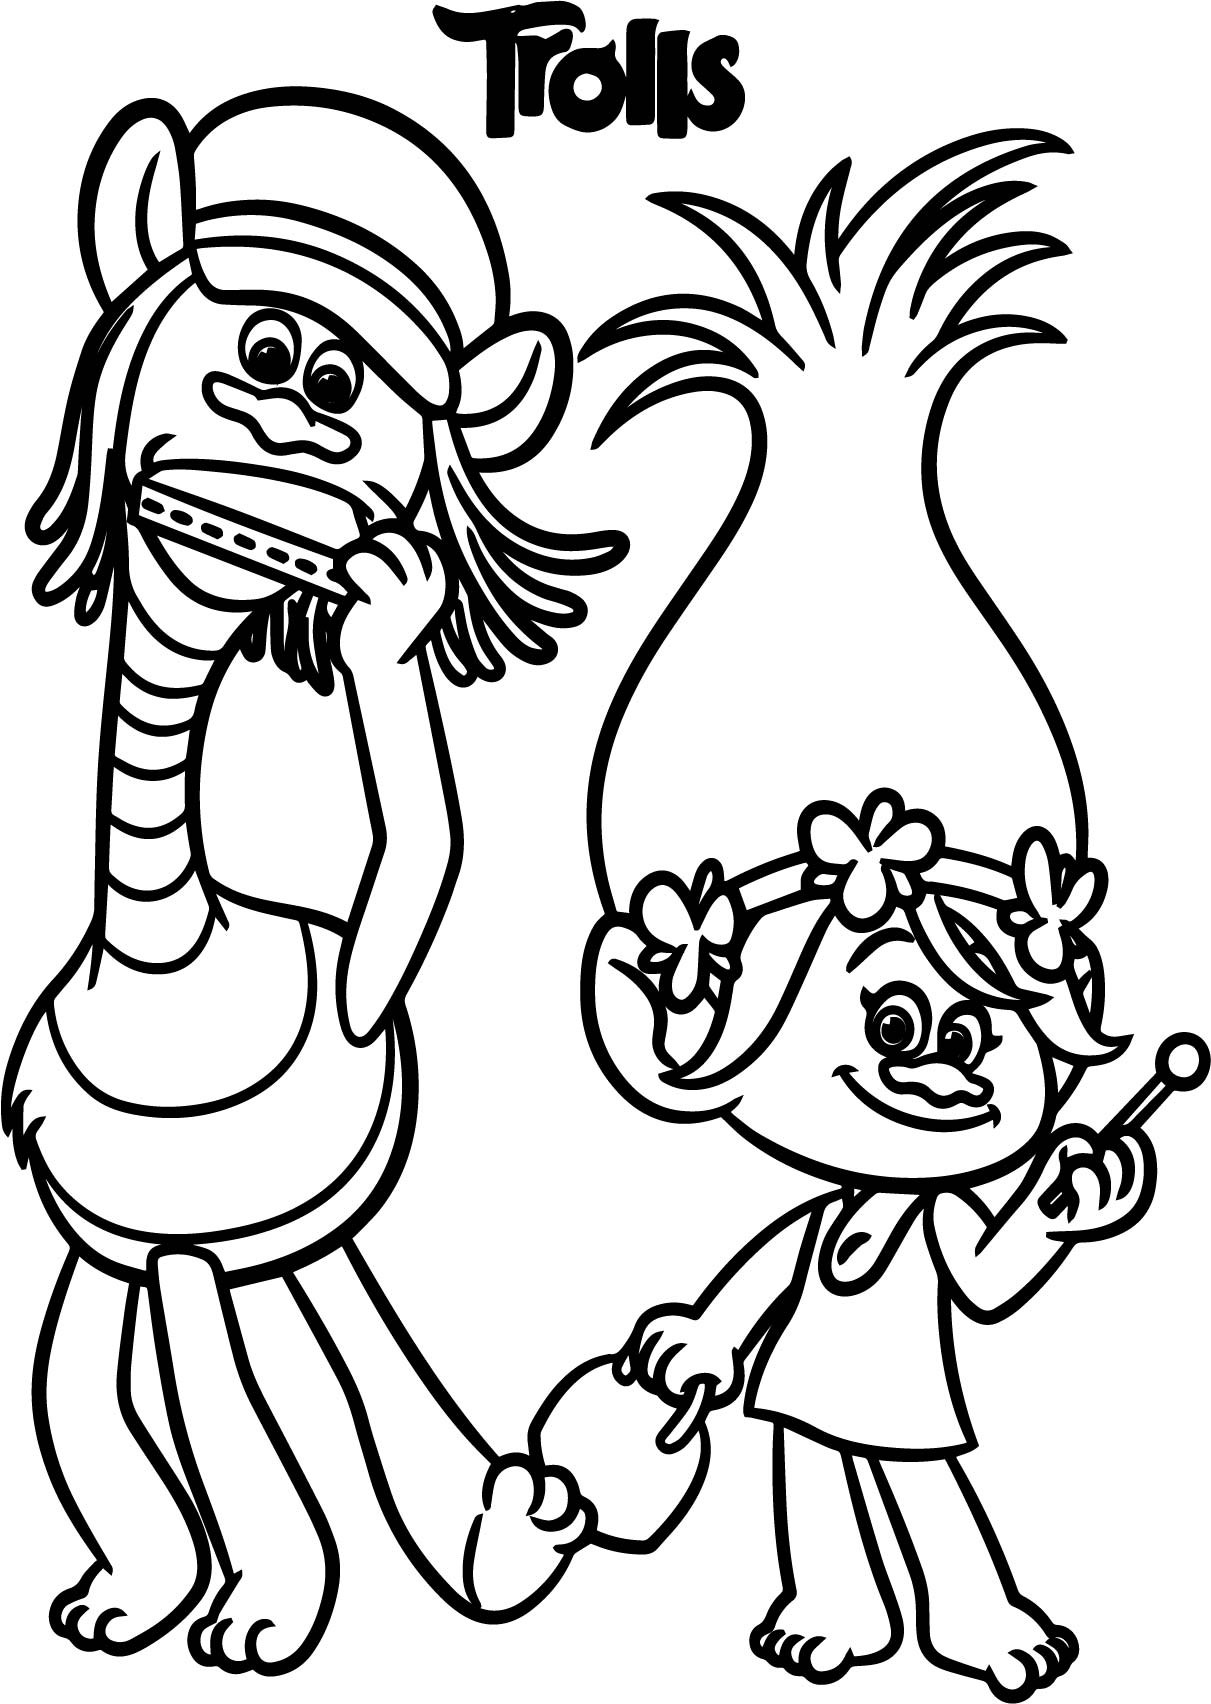 Trolls Printable Coloring Pages
 Dreamworks Trolls Coloring Pages